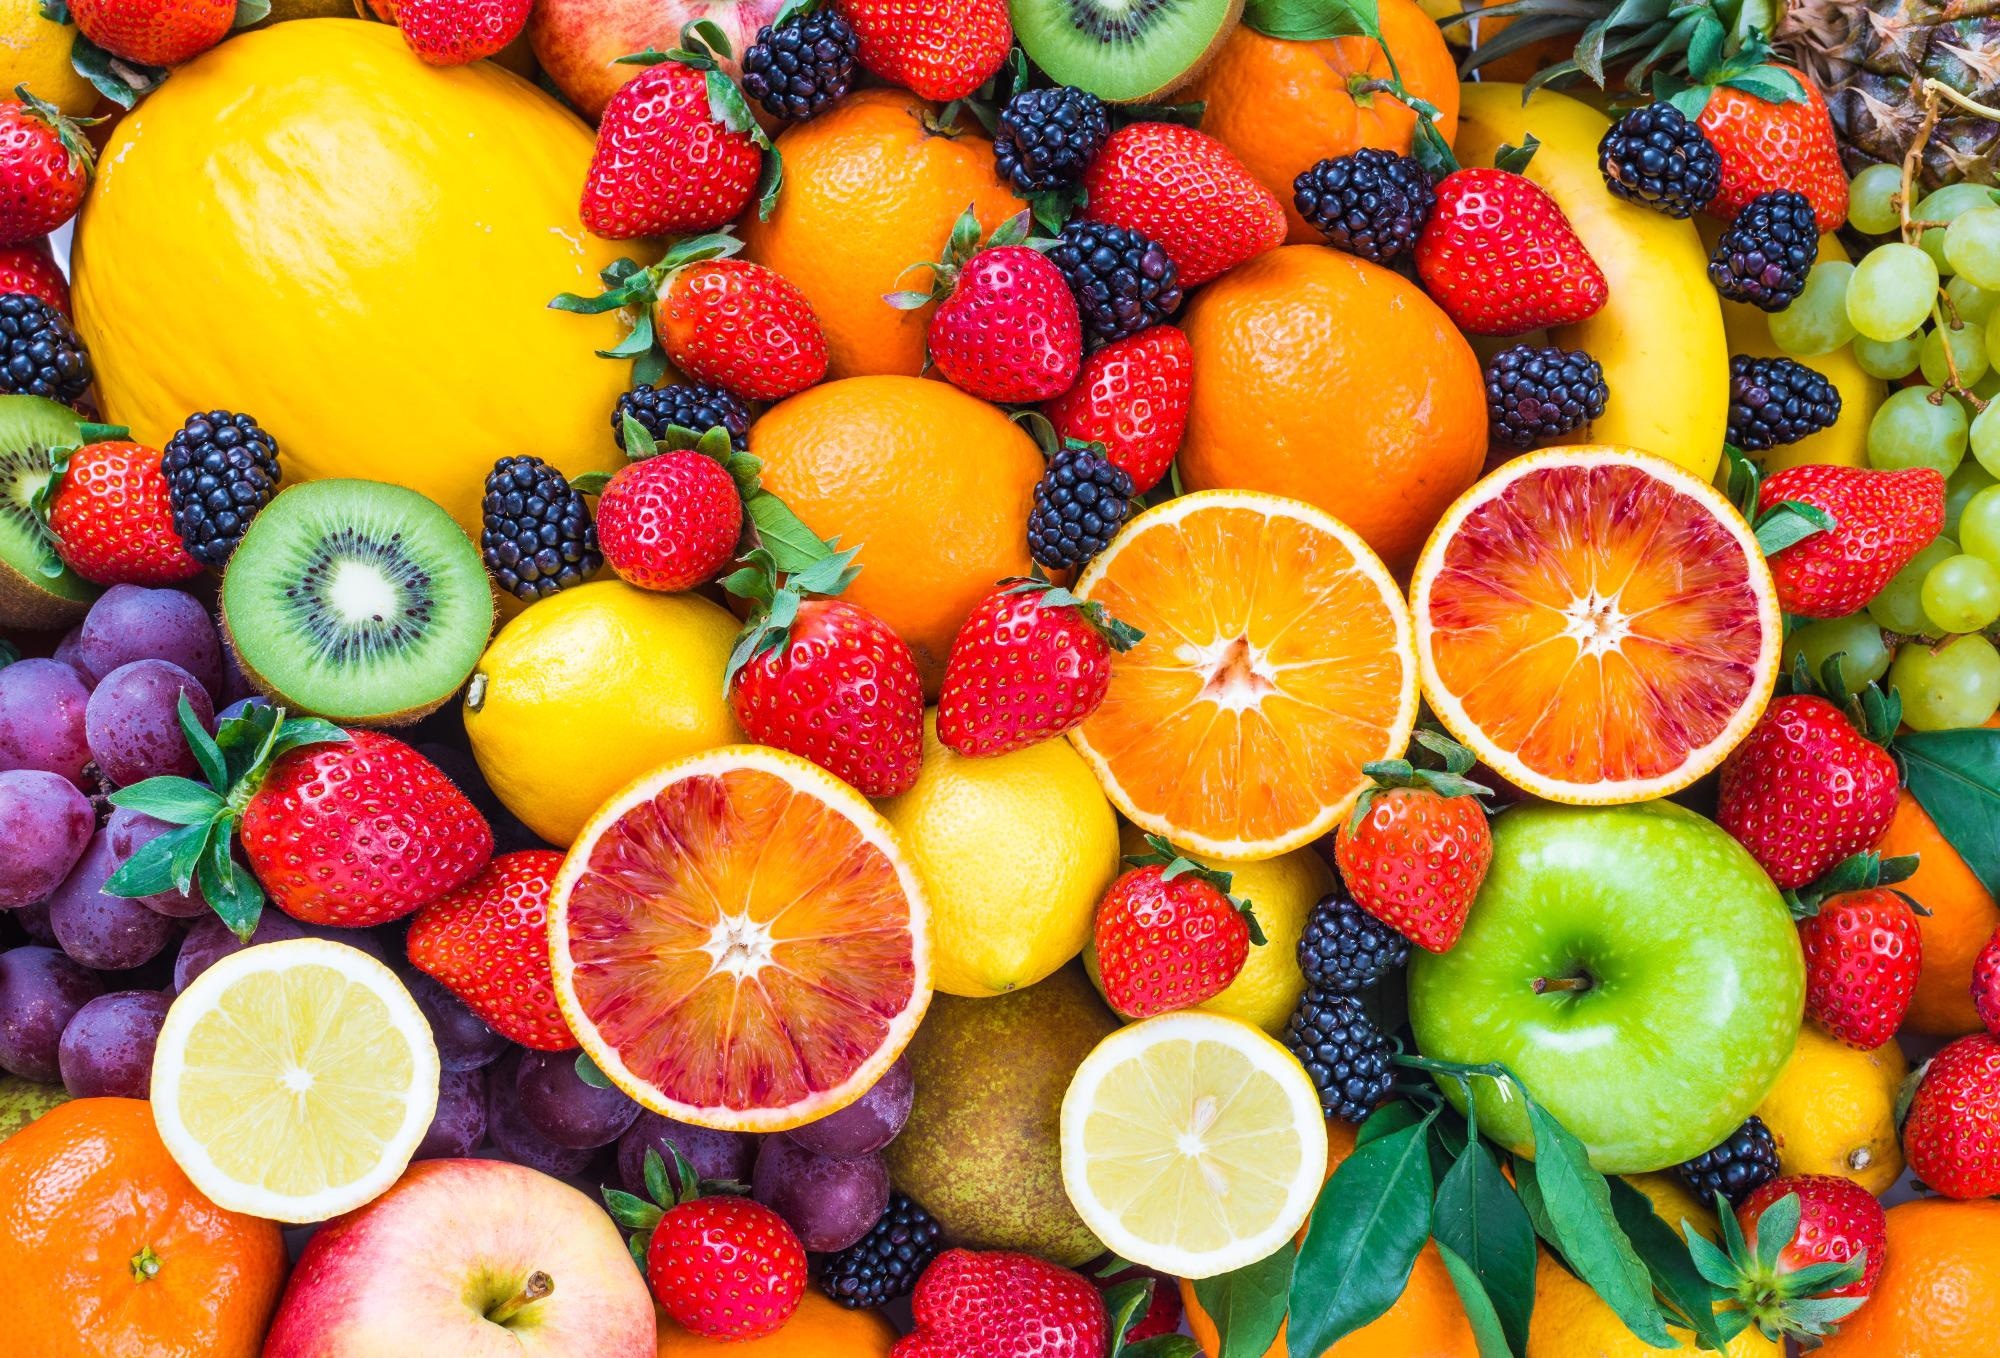 Artificial Intelligence Predicts the Flavor of Fruit.